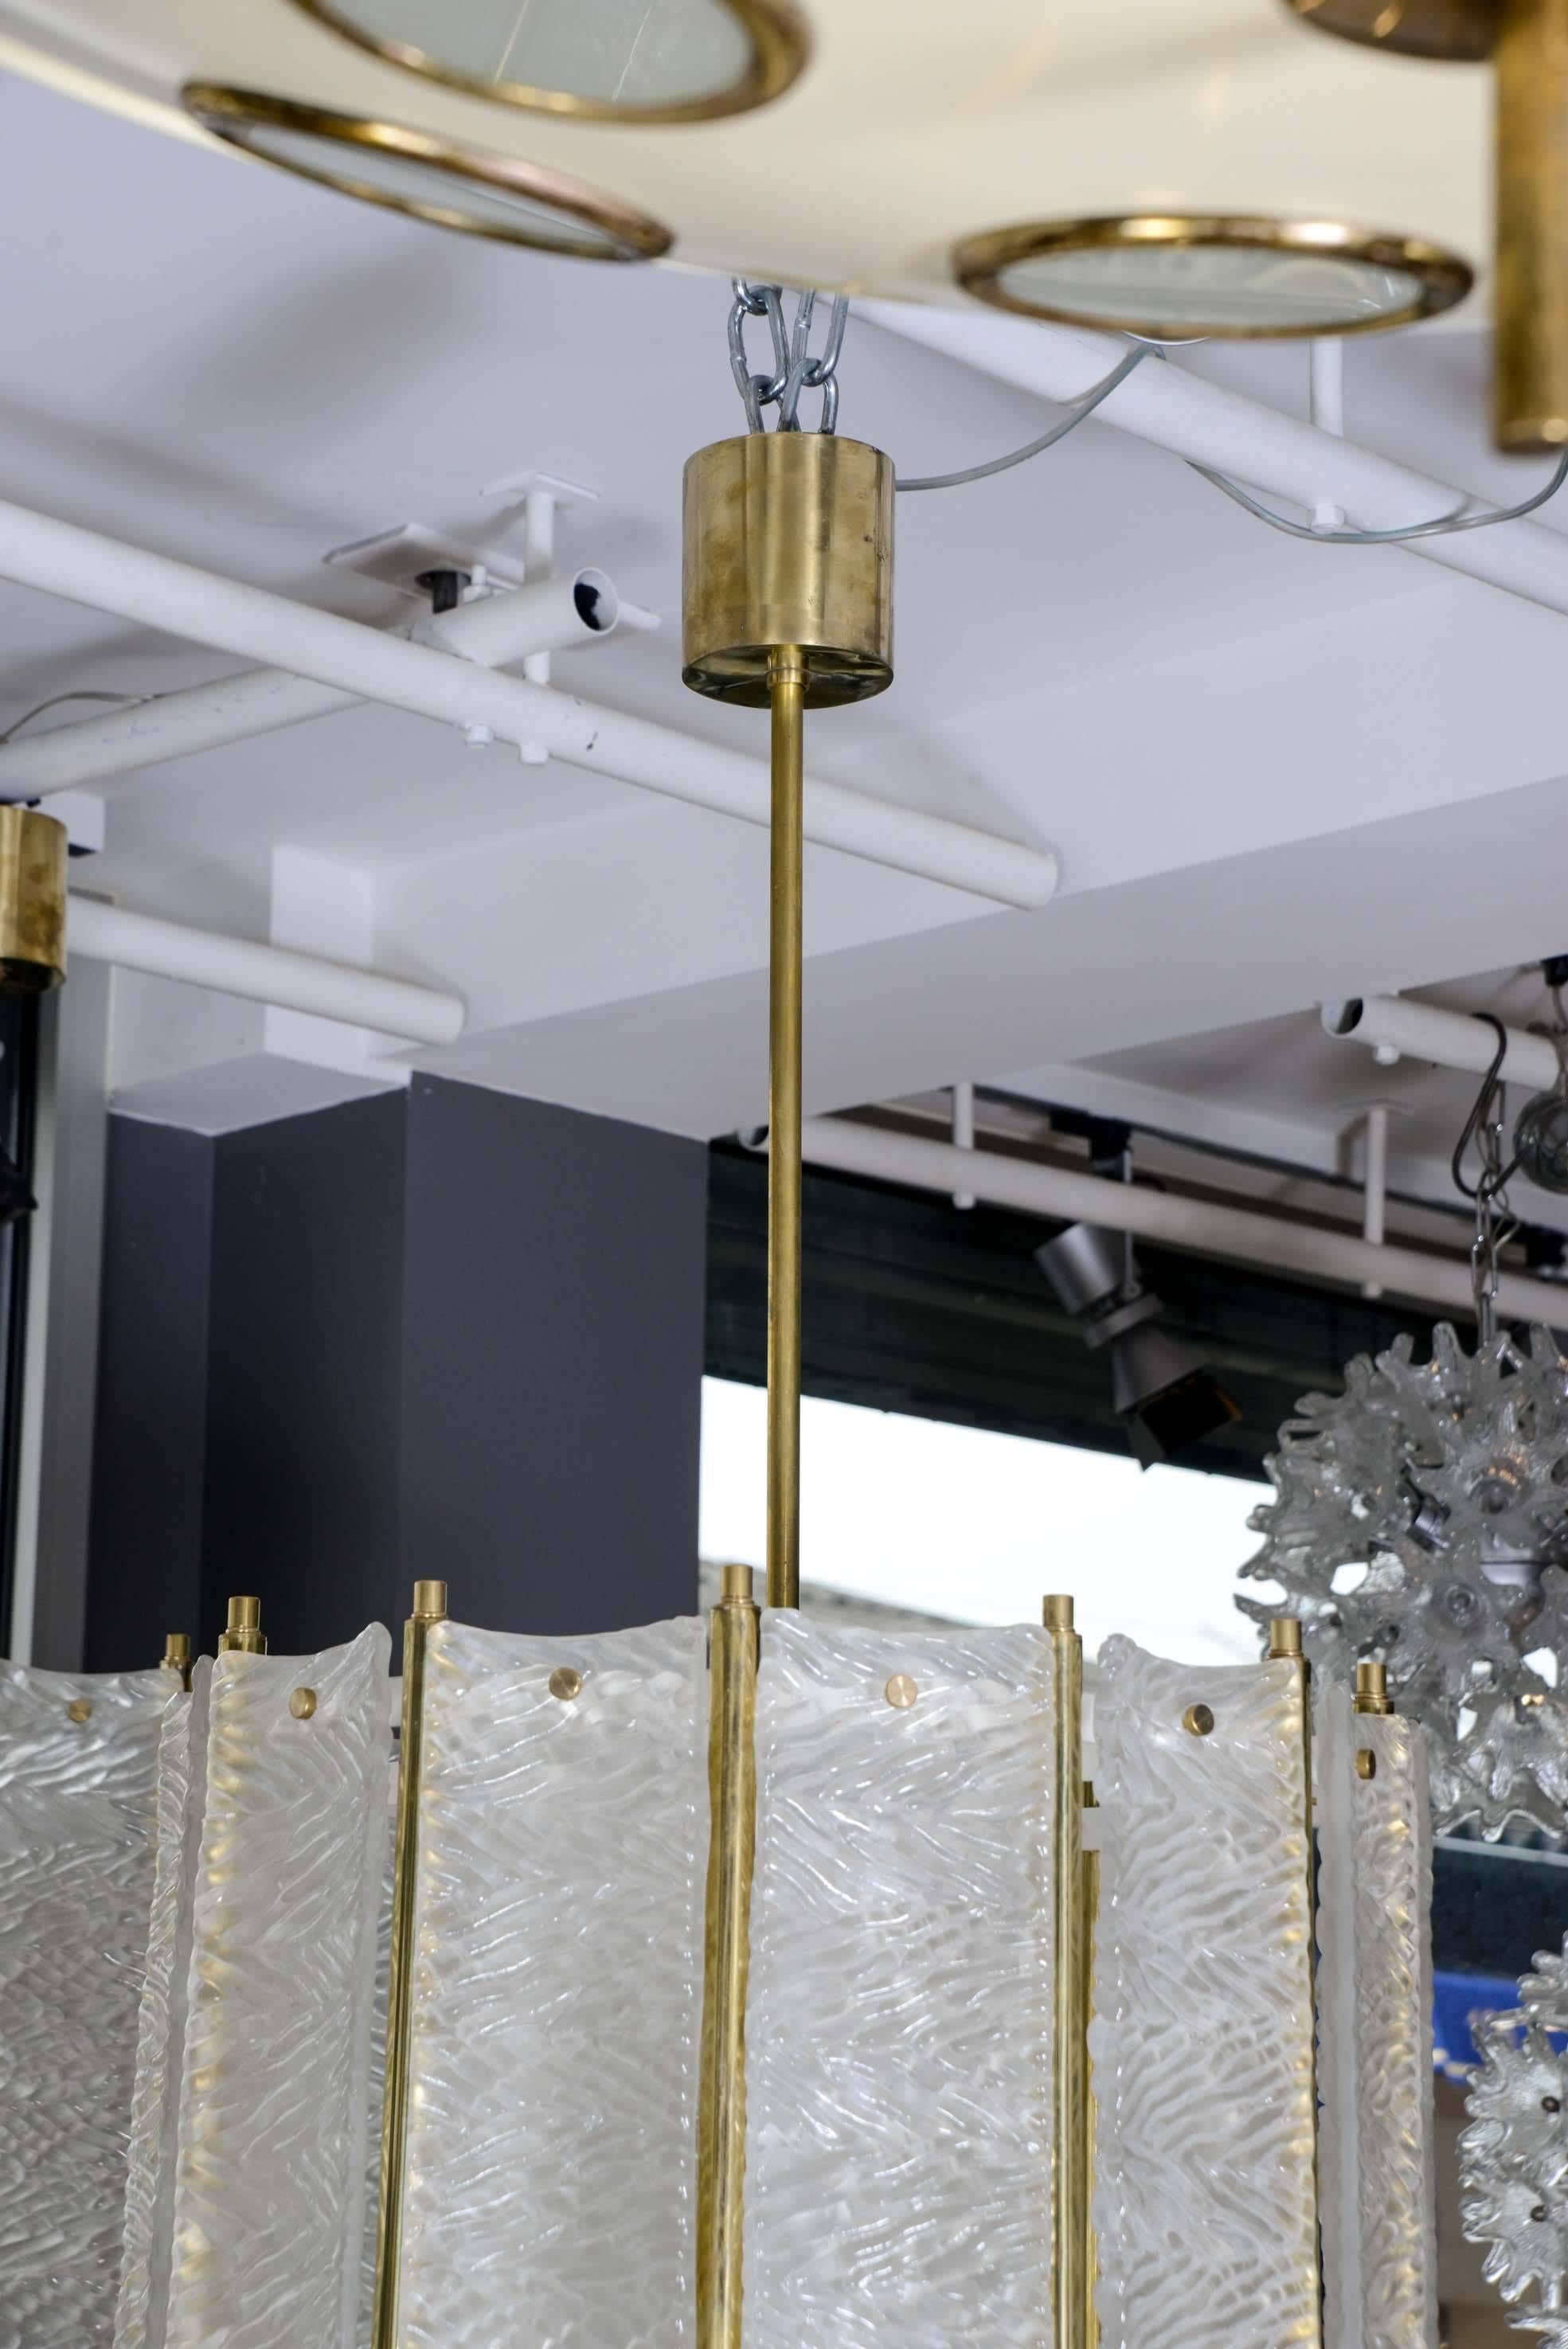 Pair of lanterns made of brass structures and side panels made of textured and opaque Murano glass.